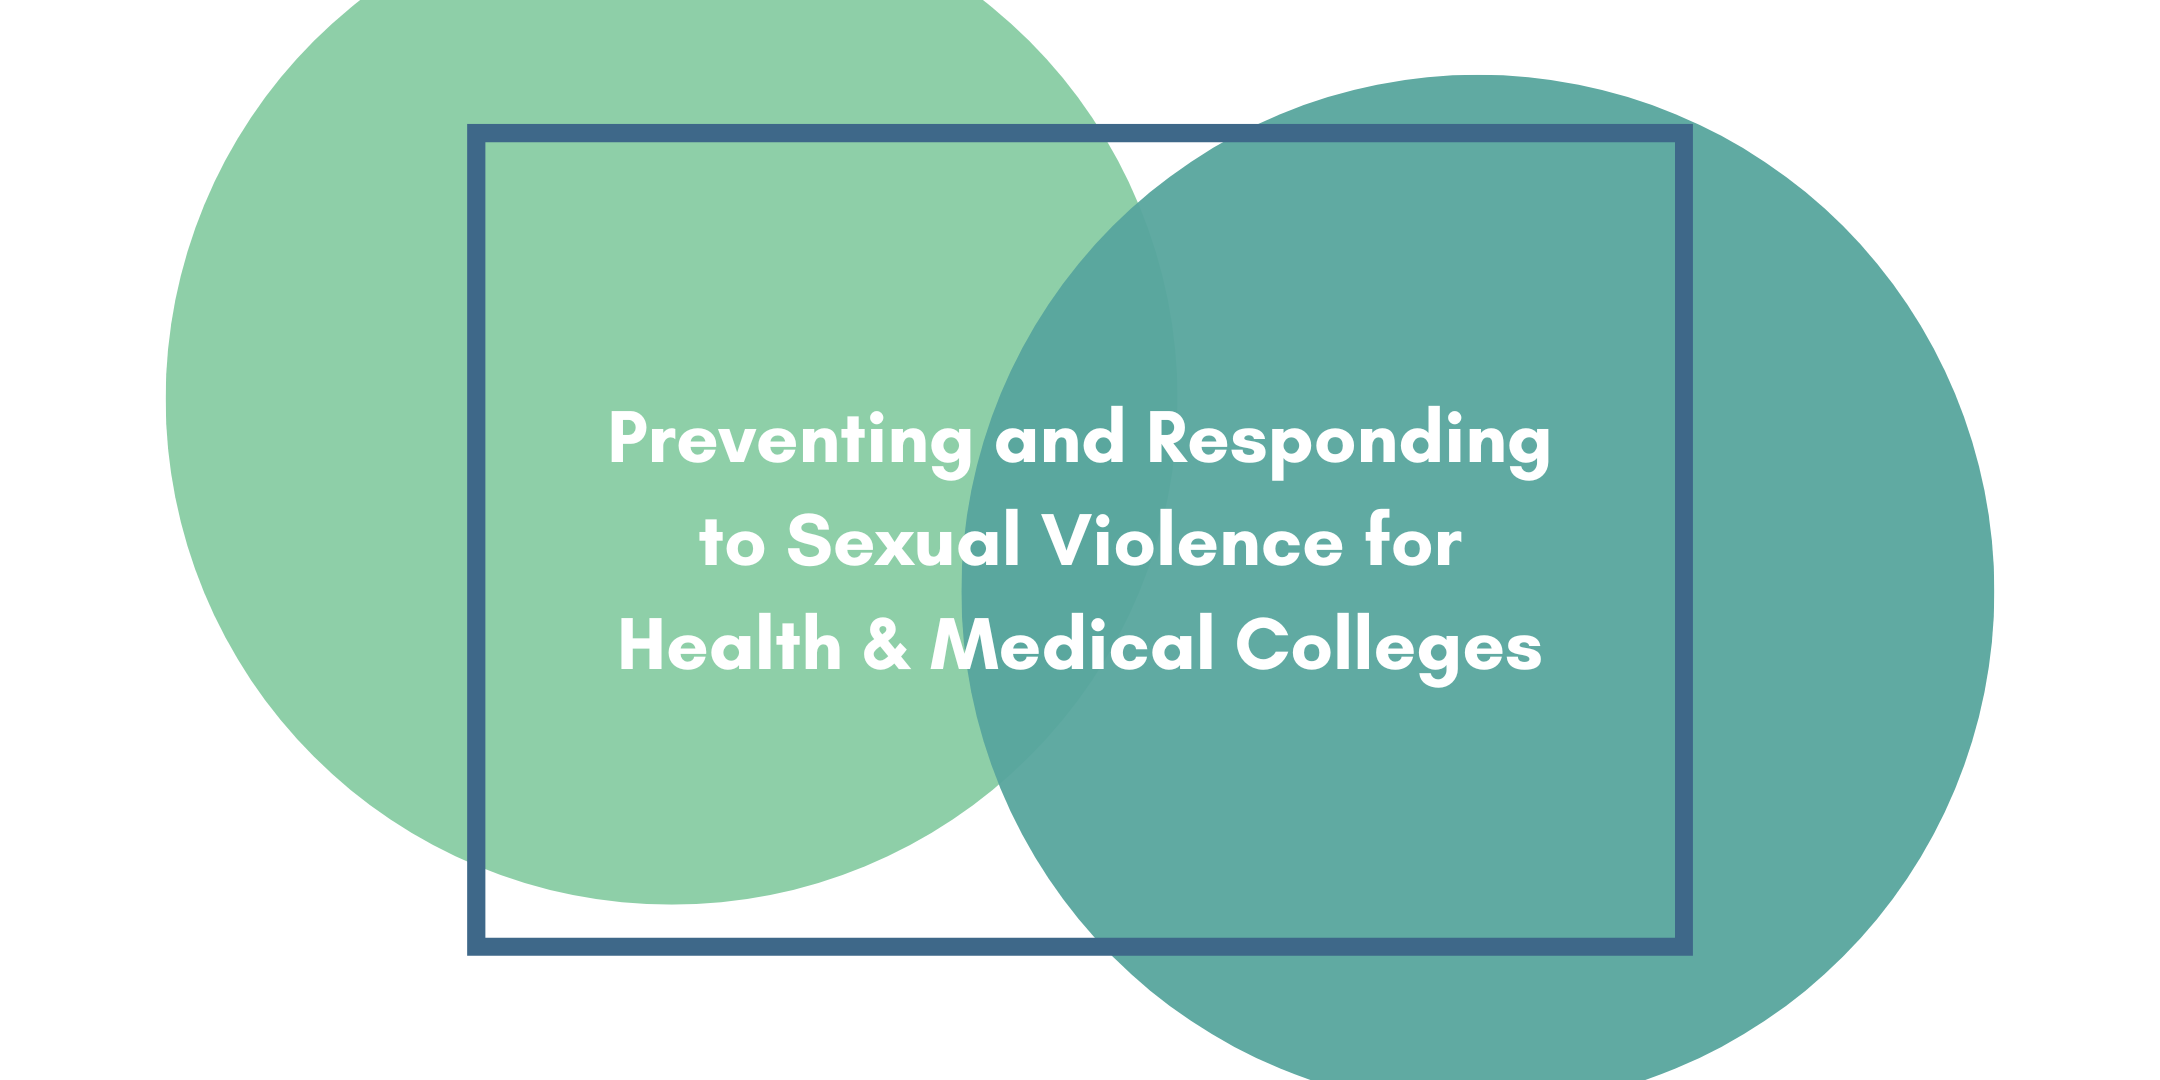 Two green circles in a dark blue box and text that says "Preventing and Responding to Sexual Violence for Health & Medical Colleges"